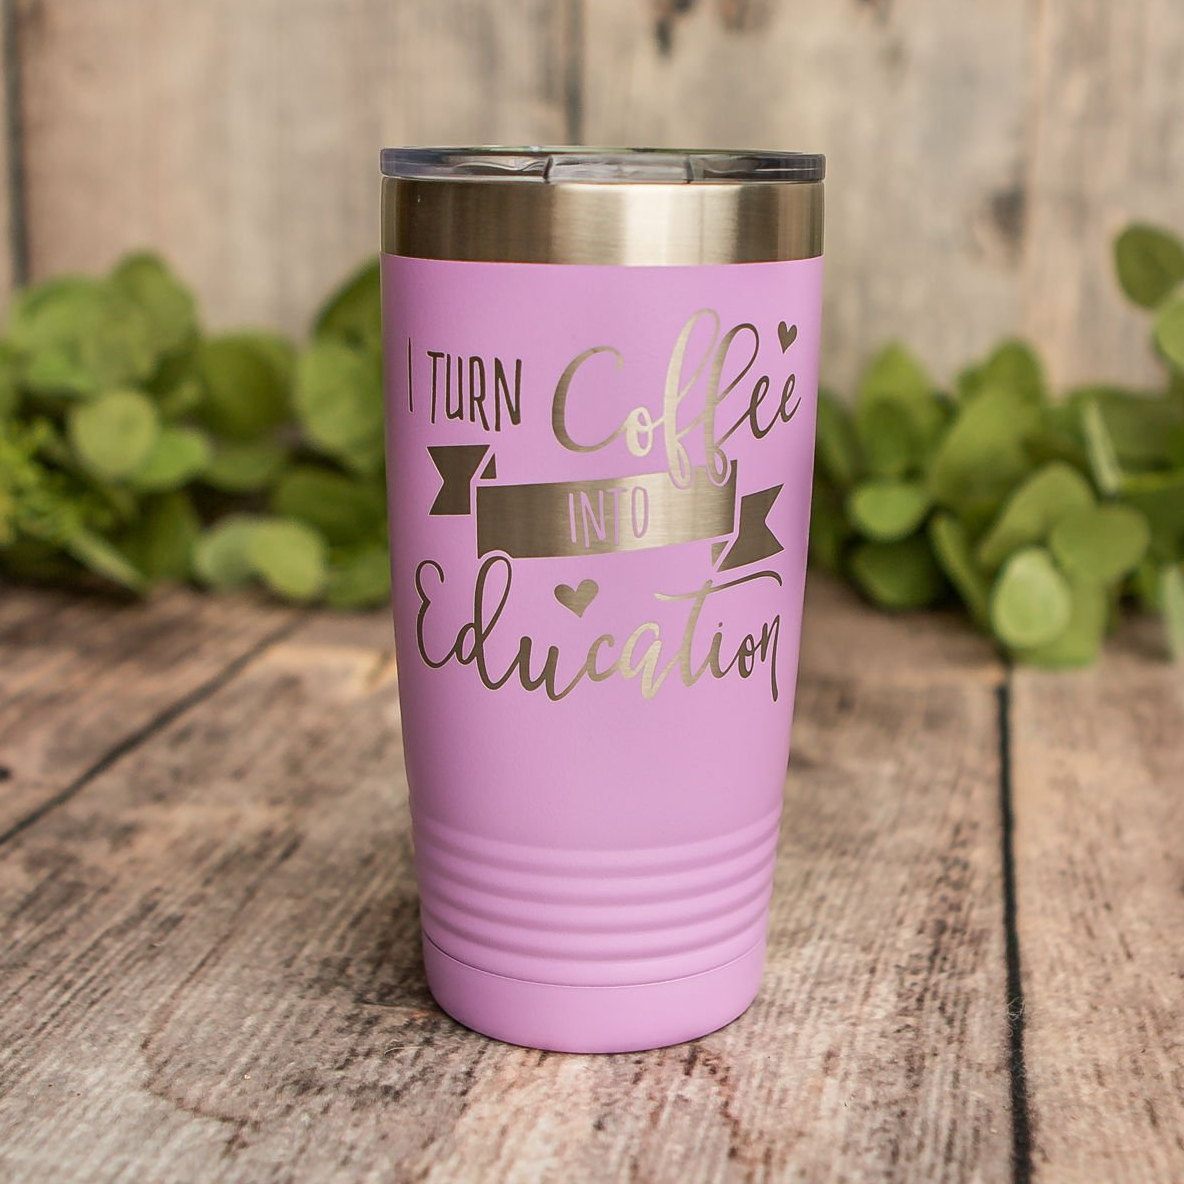 https://3cetching.com/wp-content/uploads/2020/09/coffee-into-education-engraved-stainless-steel-tumbler-insulated-teacher-travel-mug-teaching-mug-5f5fc080.jpg